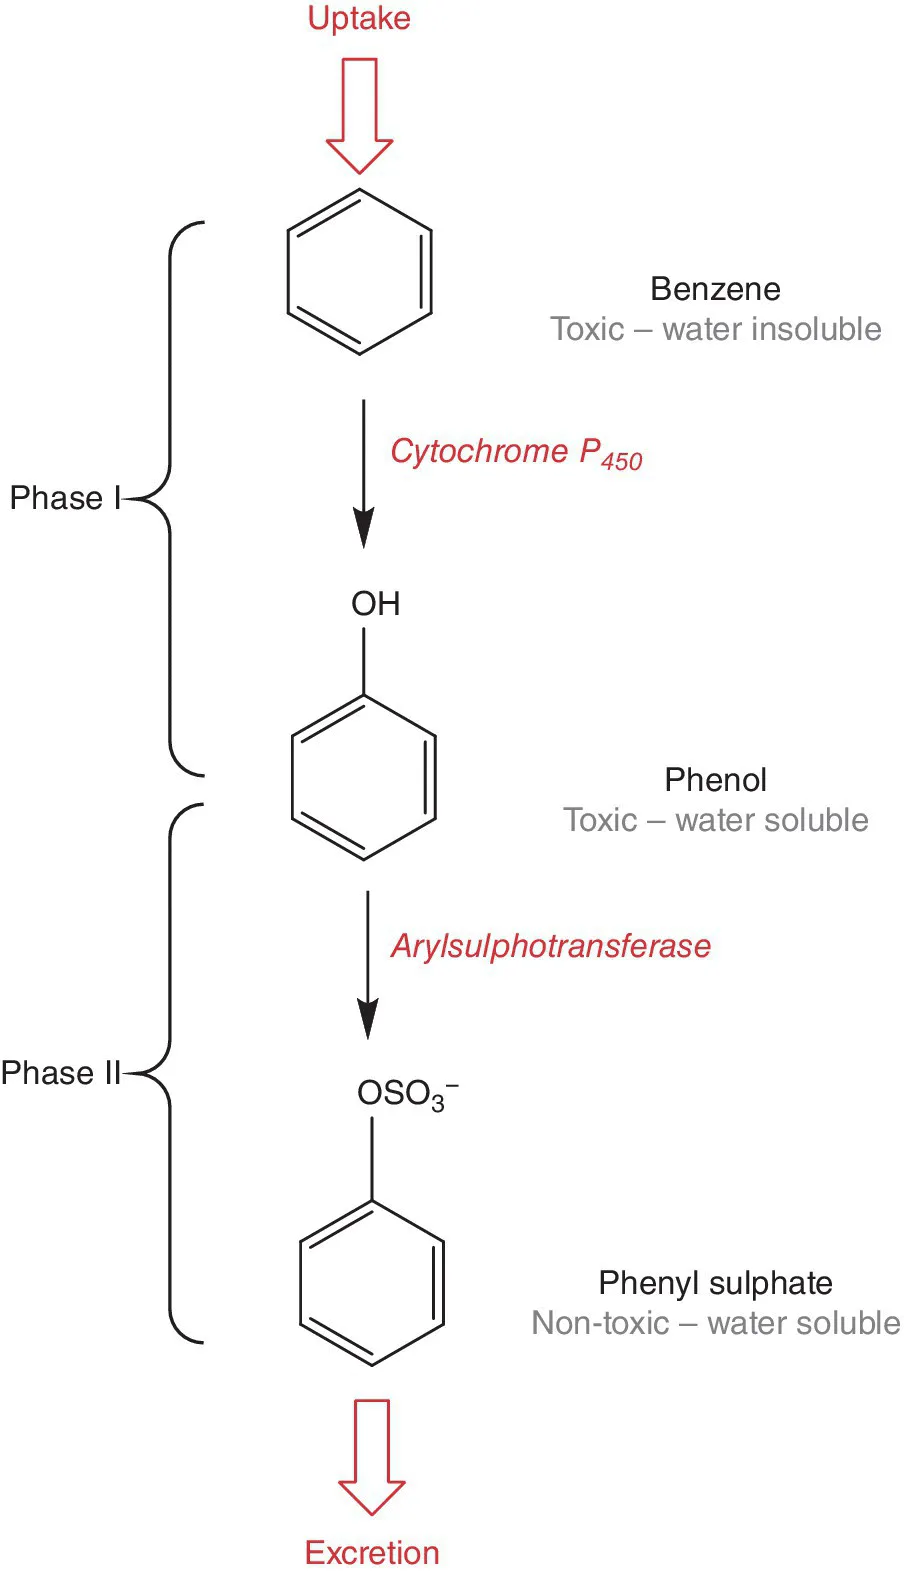 Flow diagram illustrating the phase I and II metabolism for a simple compound, displaying downward arrows from “Uptake” to skeletal formula of benzene, to phenol, to phenyl sulphate, and to “Excretion.”